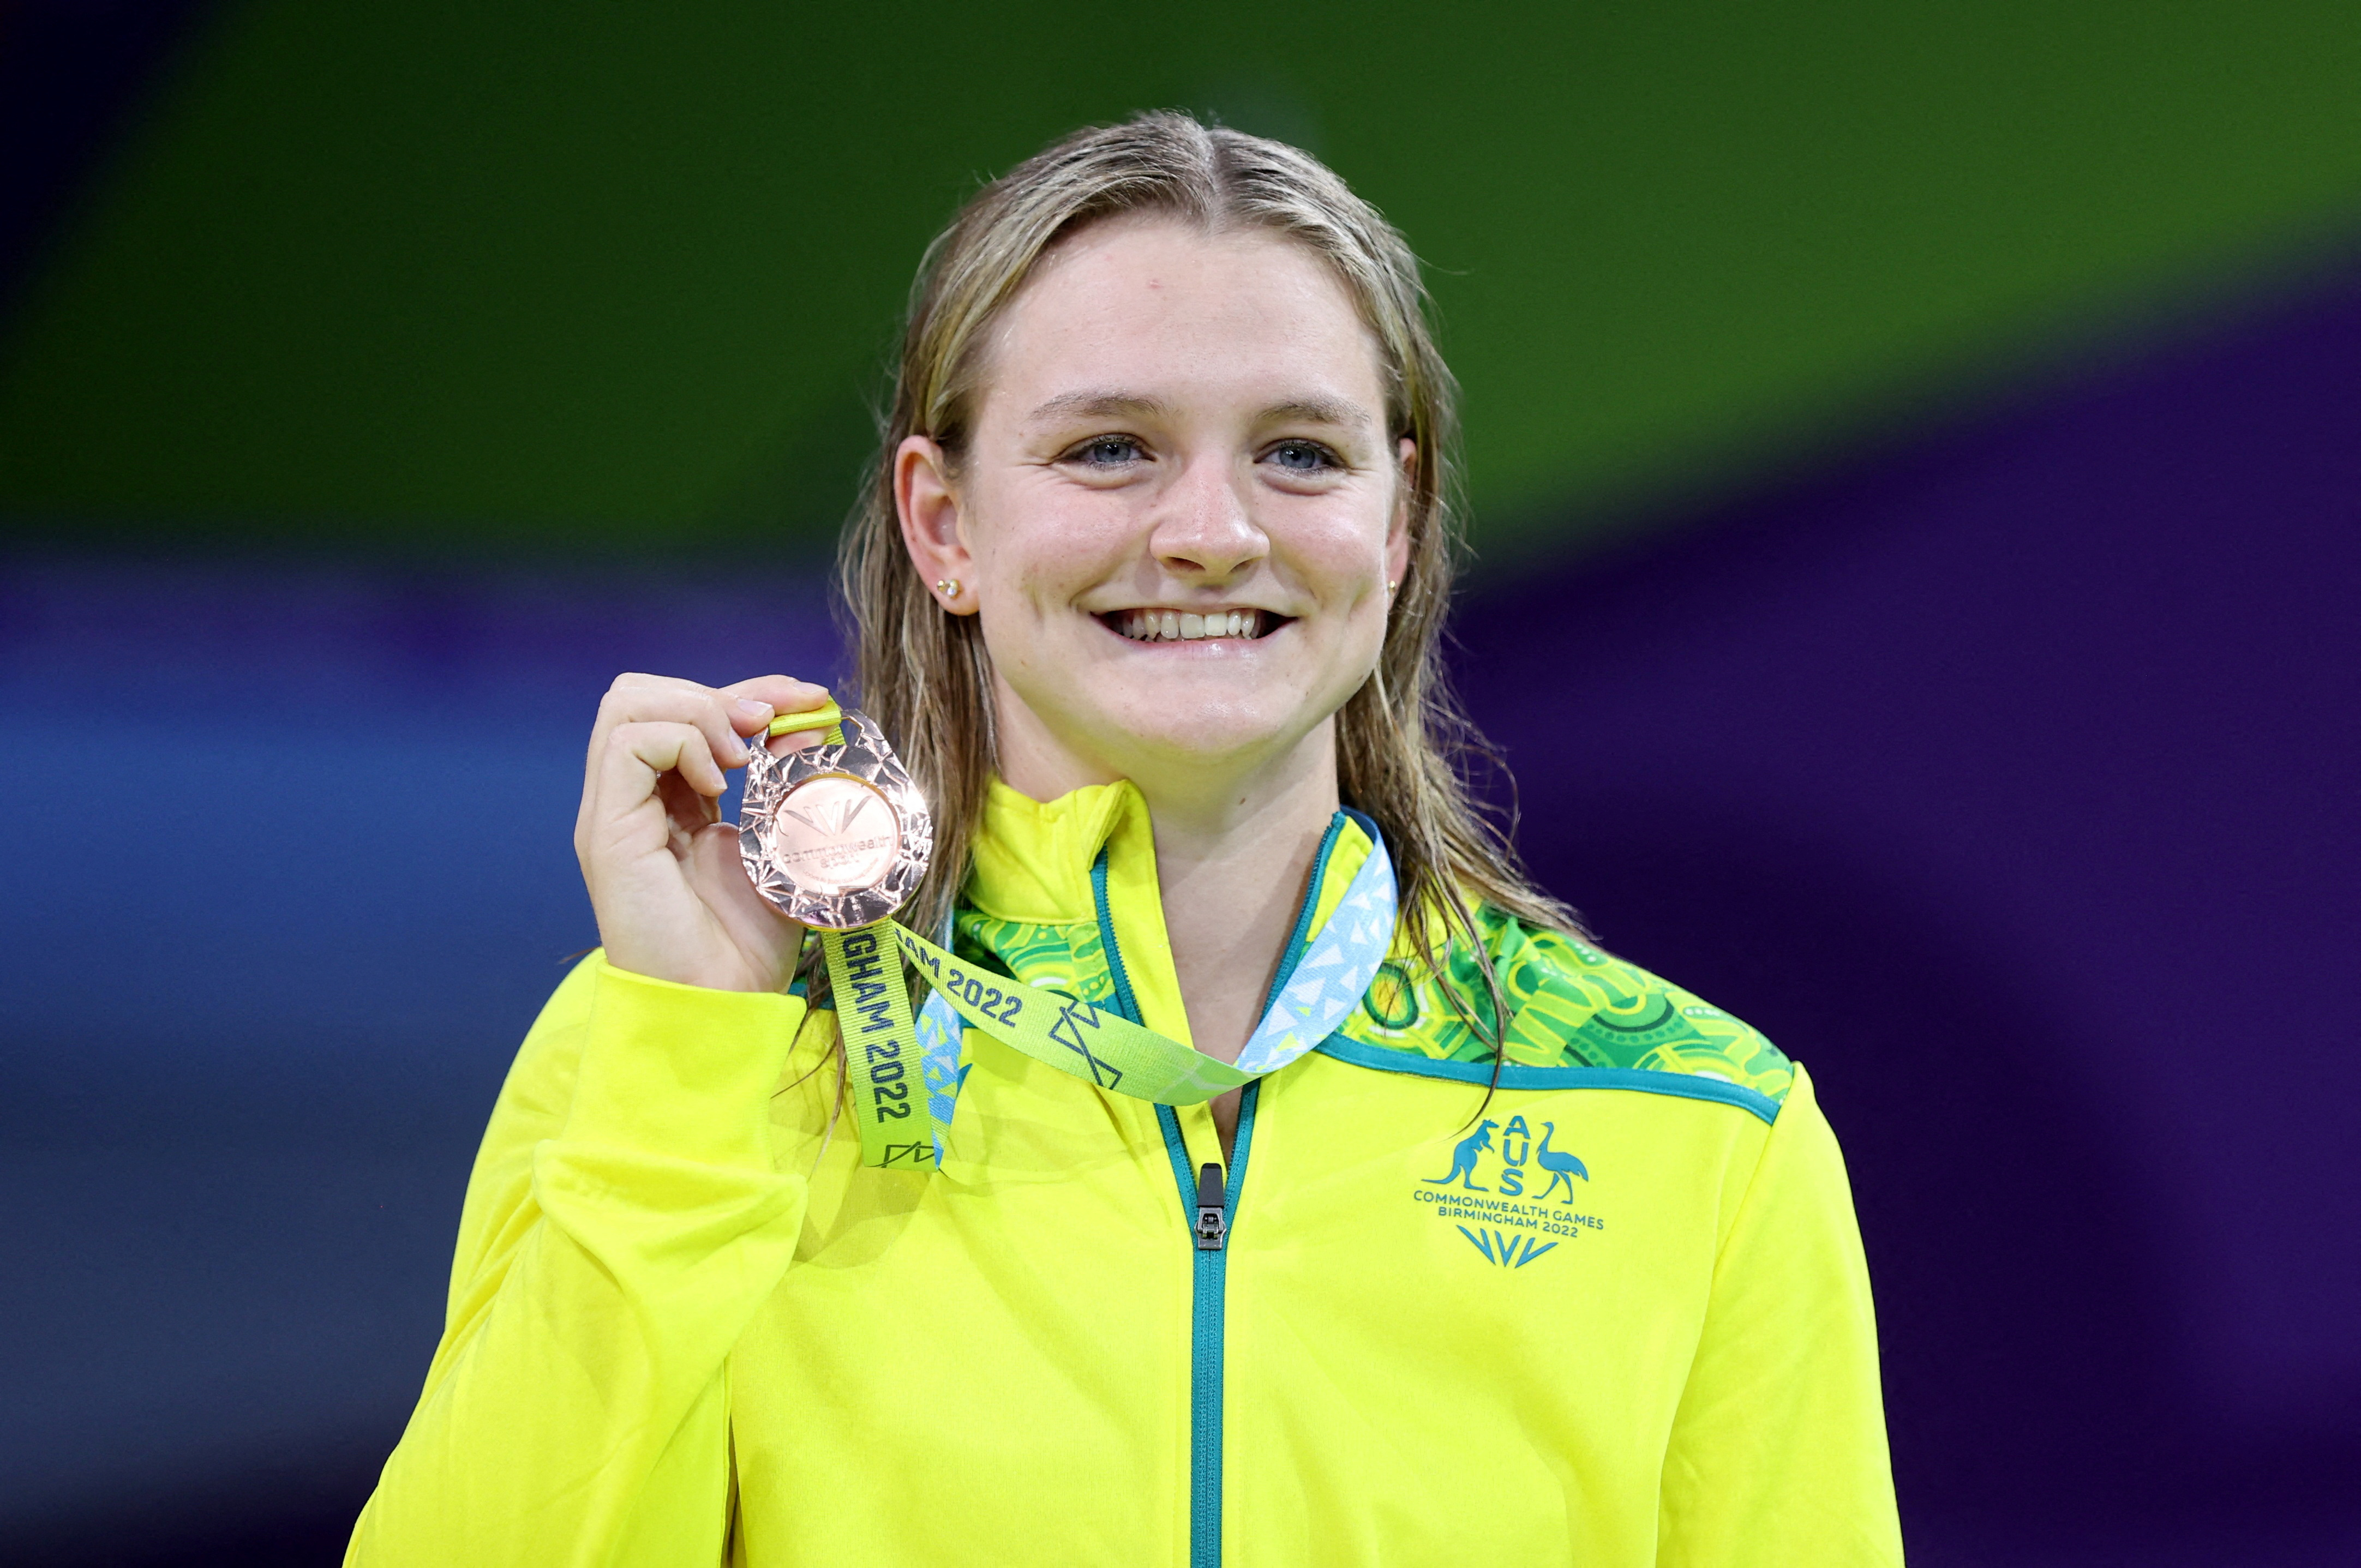 Swimming-Australia breaststroker Hodges retires with 'hips of 60-year-old'